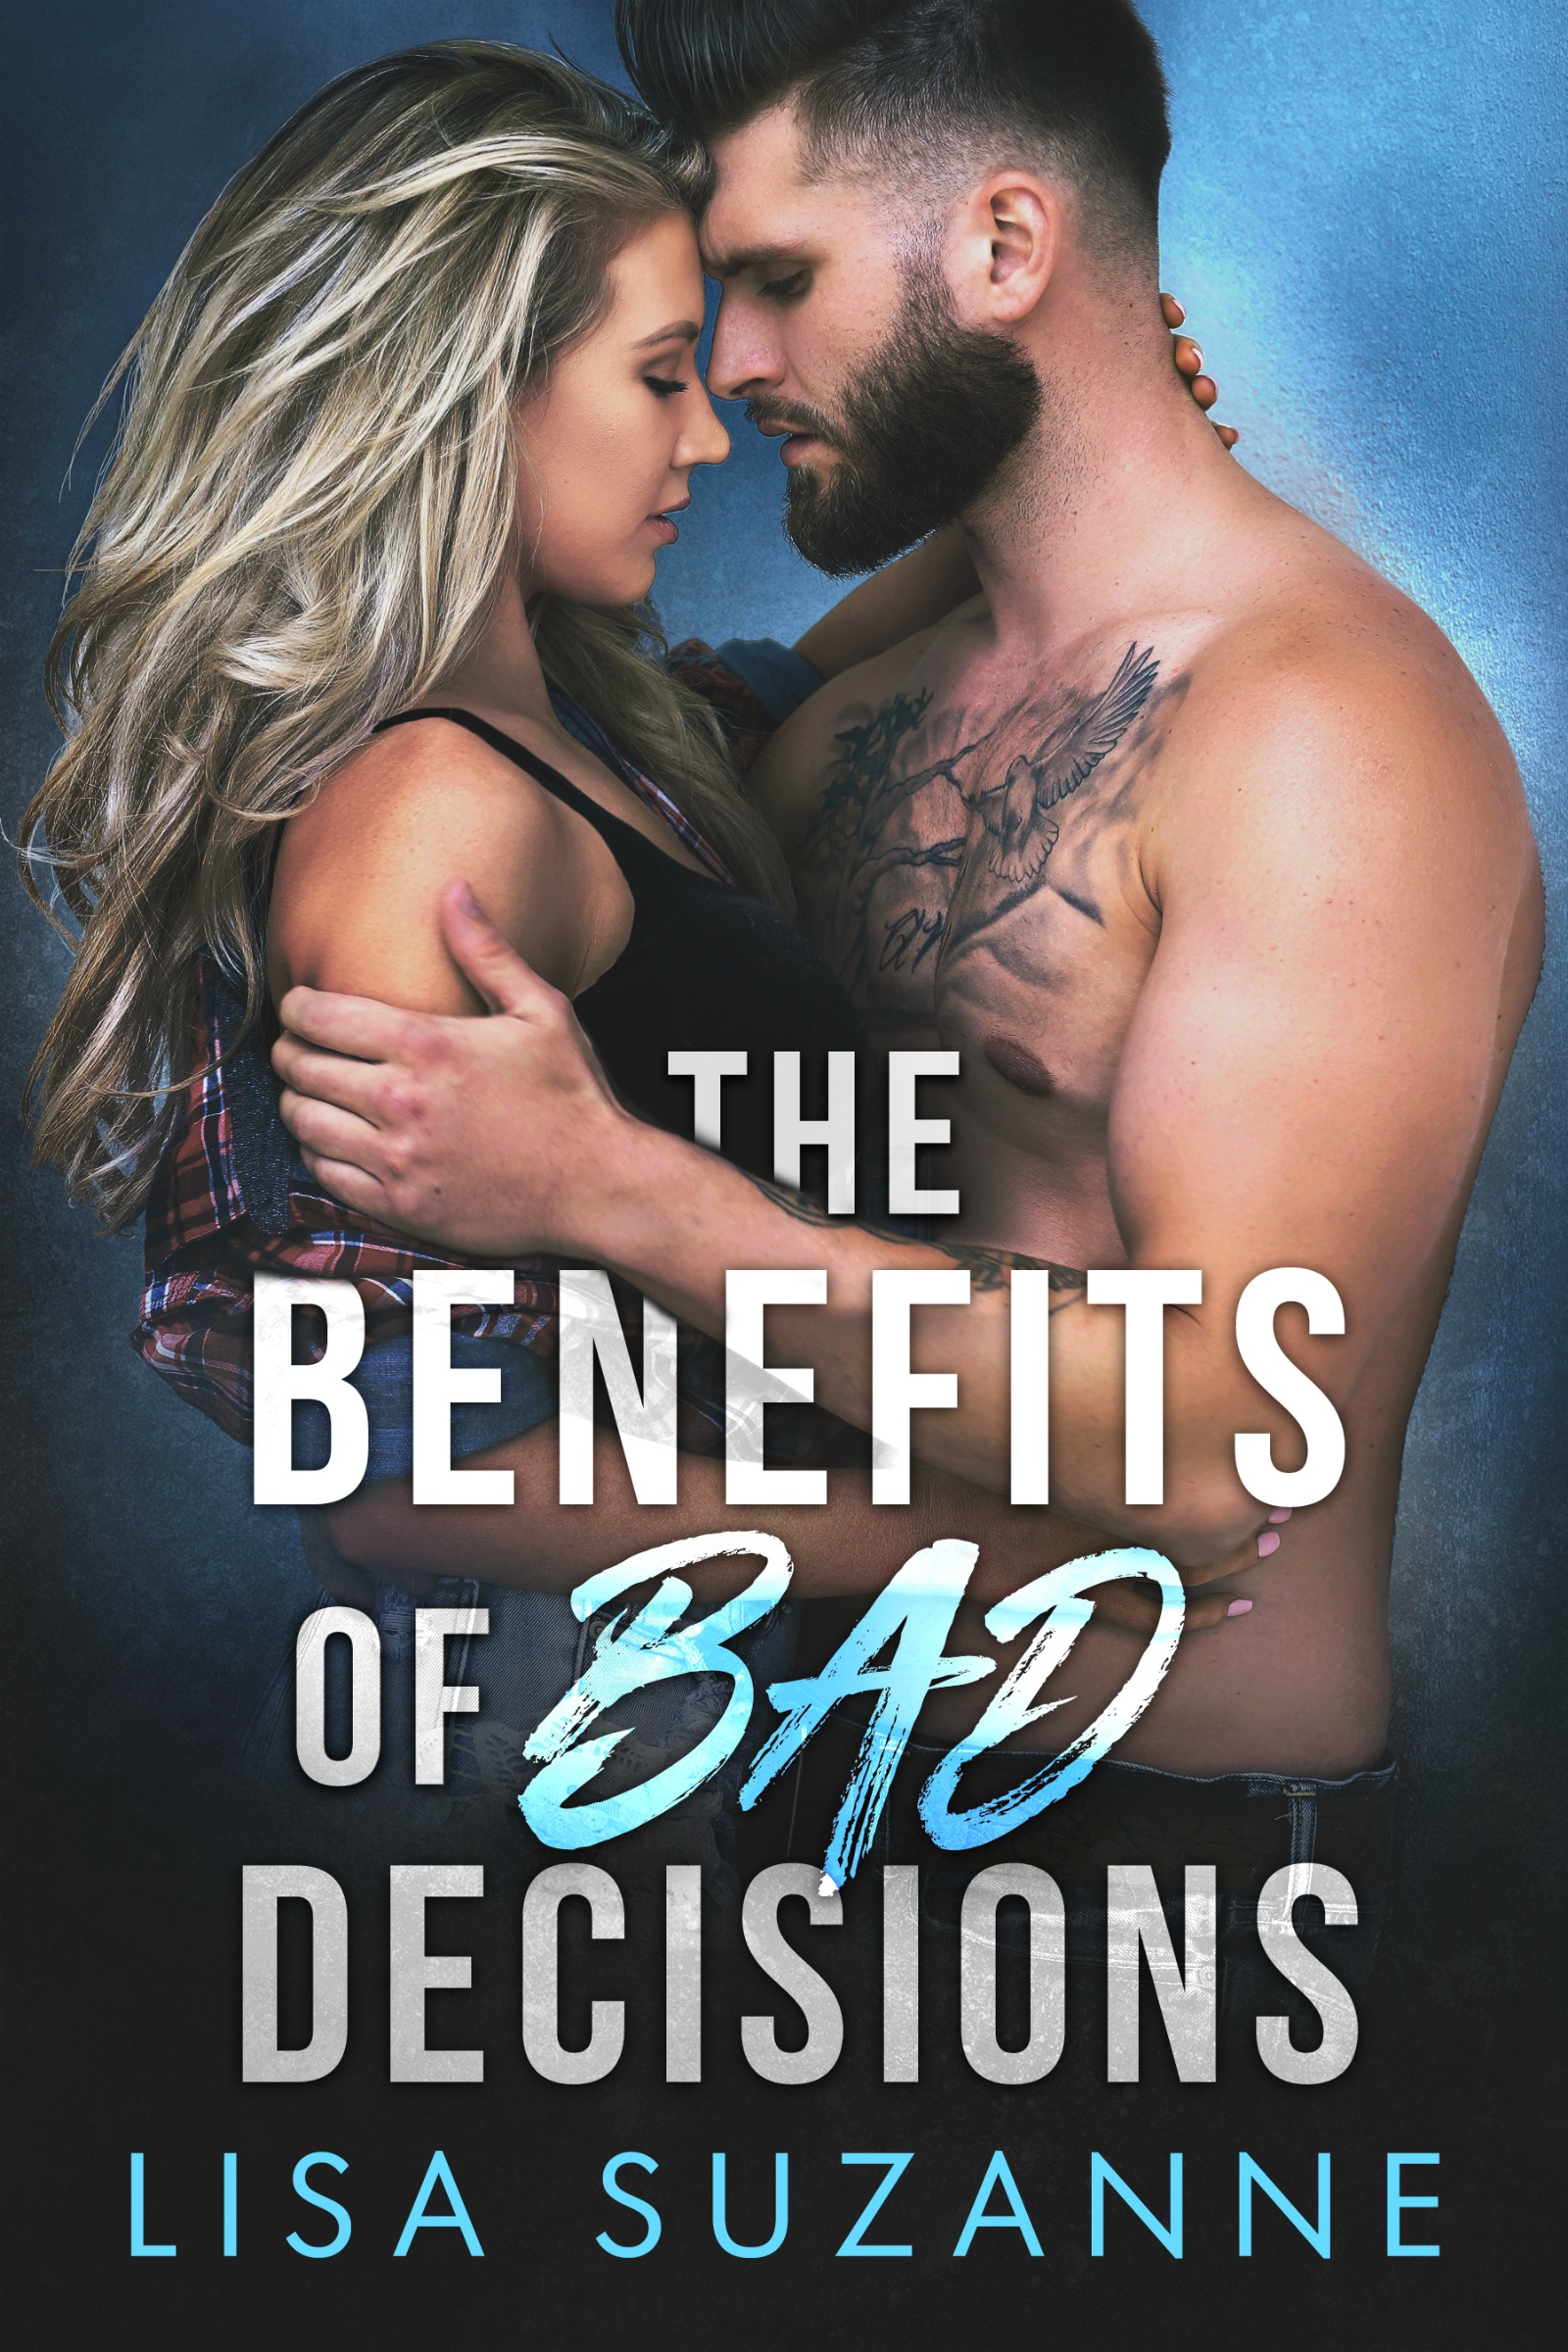 The Benefits of Bad Decision by Lisa Suzanne [Cover Reveal]